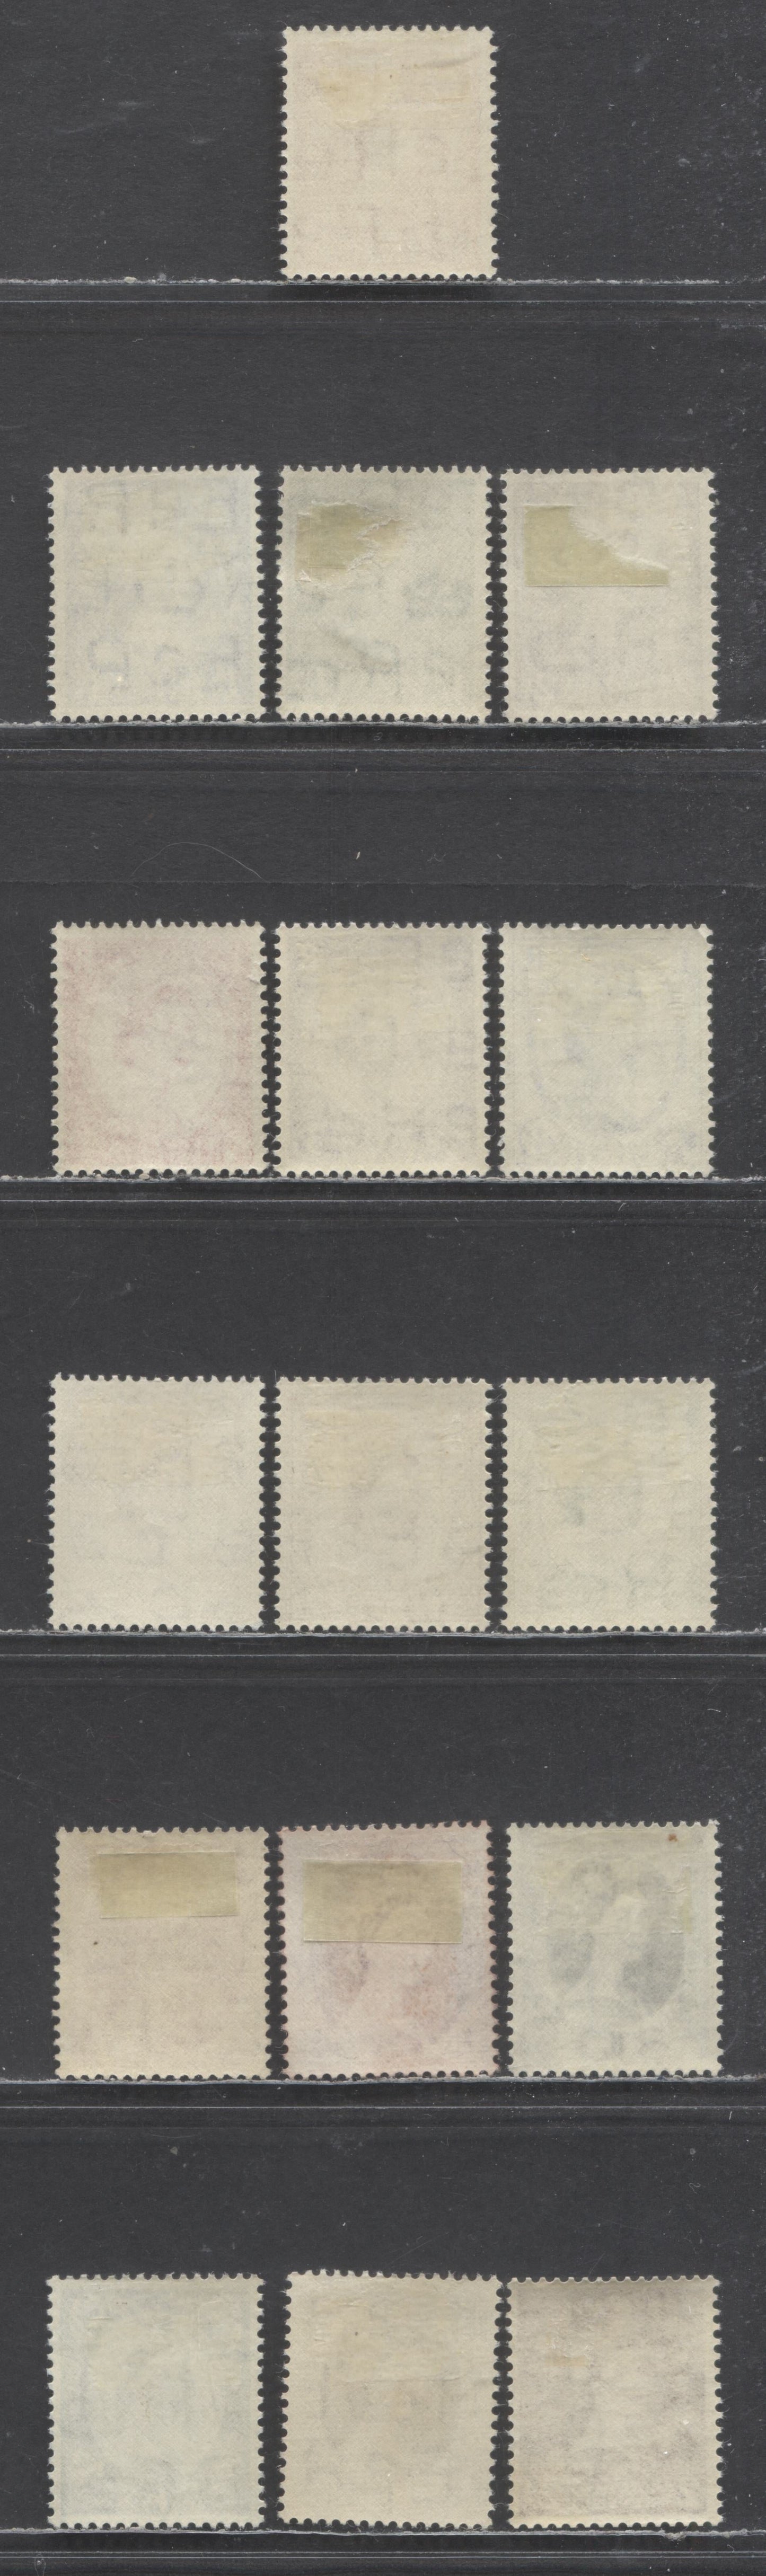 Lot 7 Great Britain SC#292/308 1952-1954 Wilding Issue, Tudor Crown Wmk, 15 F/VFOG Singles, Click on Listing to See ALL Pictures, Estimated Value $35